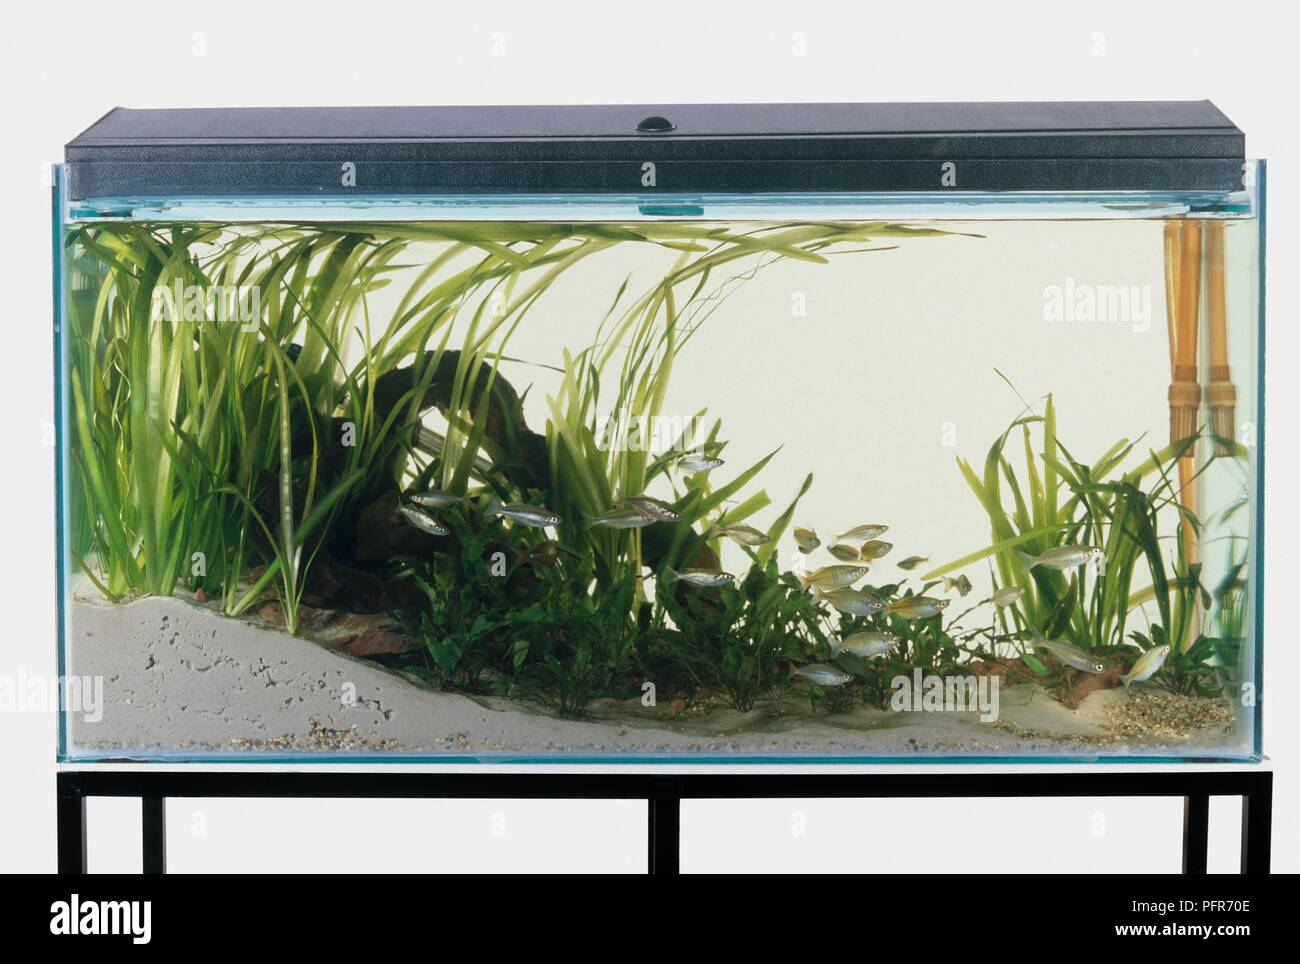 Aquarium tank filled with plants and tropical fish Stock Photo